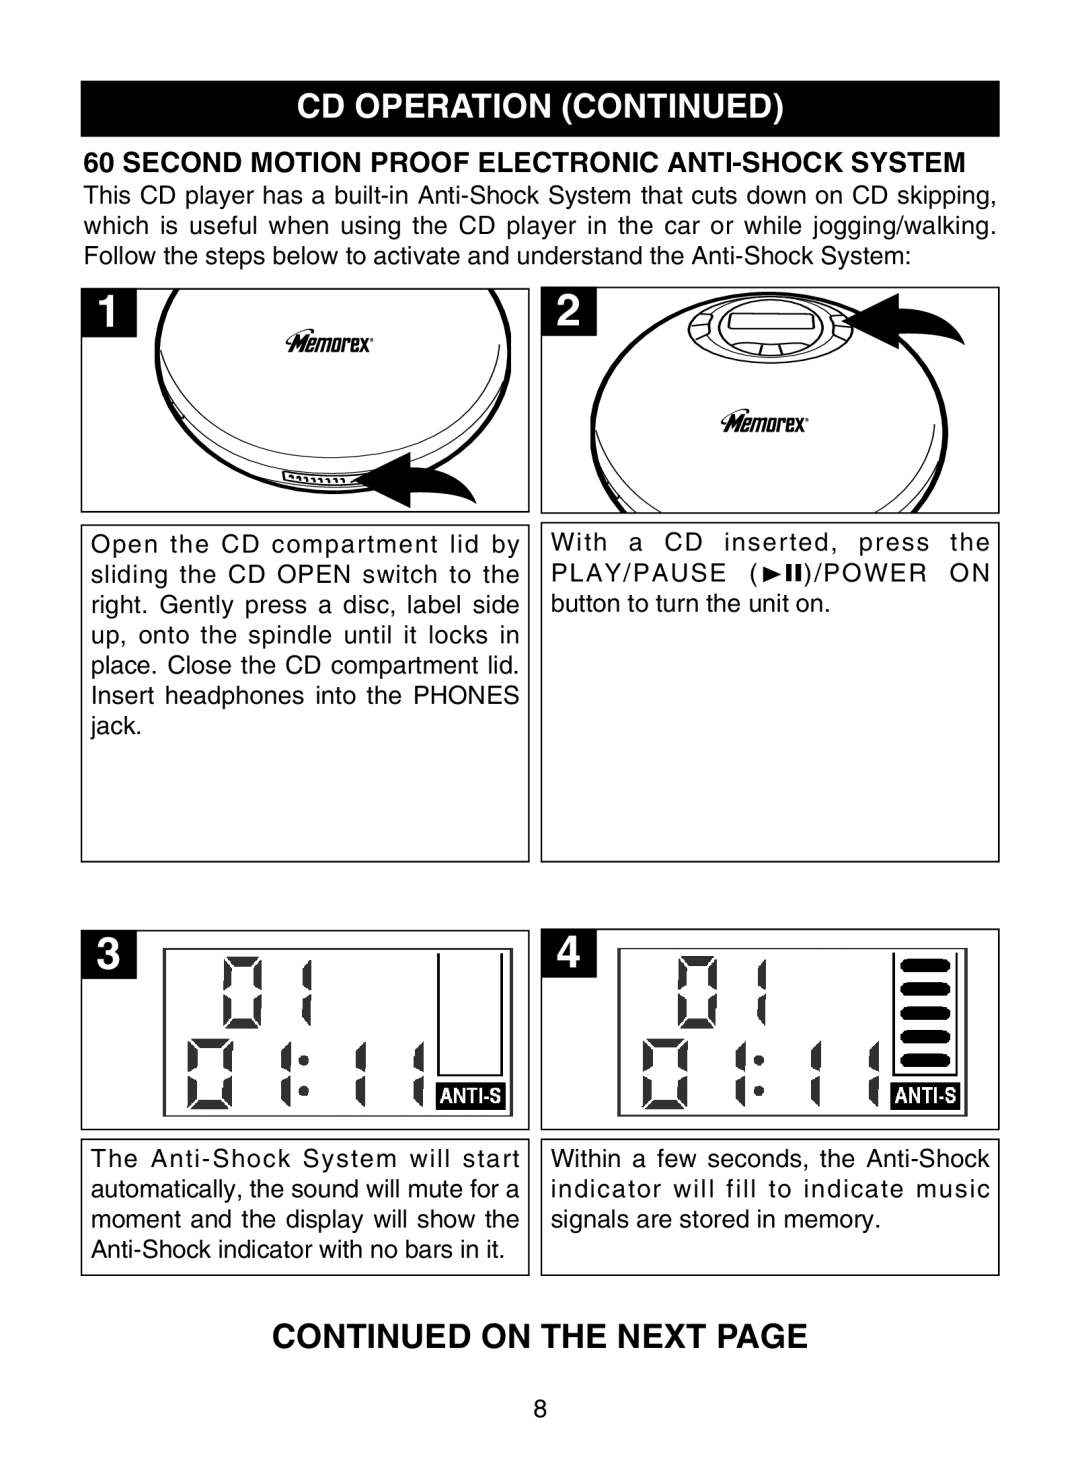 Memorex MD6483 manual Cd Operation Continued, Continued On The Next Page 